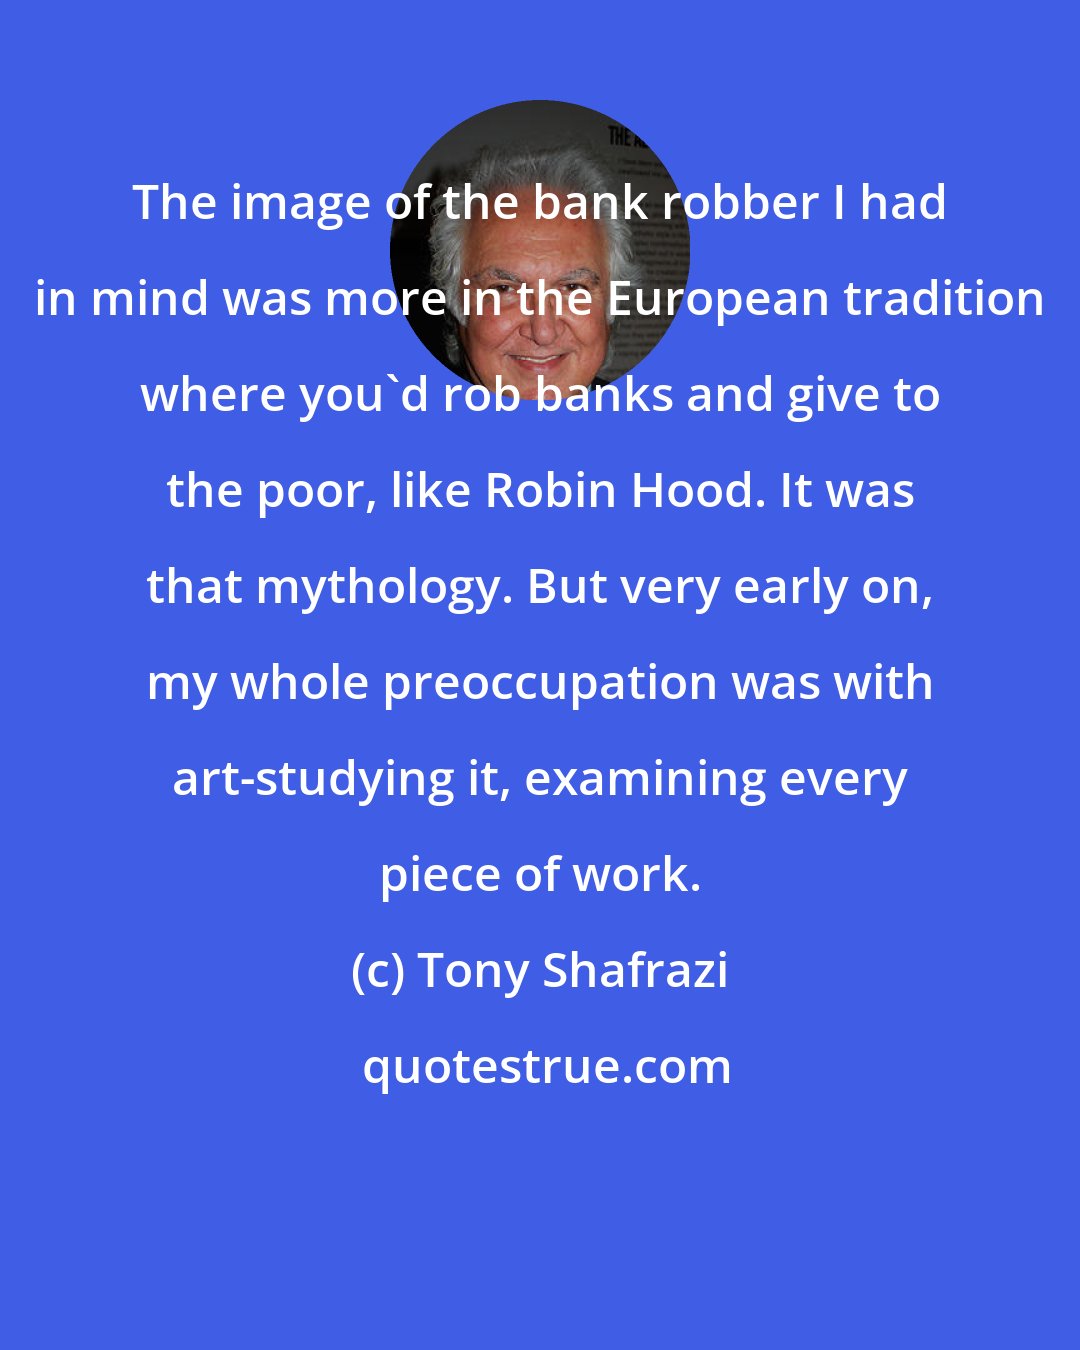 Tony Shafrazi: The image of the bank robber I had in mind was more in the European tradition where you'd rob banks and give to the poor, like Robin Hood. It was that mythology. But very early on, my whole preoccupation was with art-studying it, examining every piece of work.